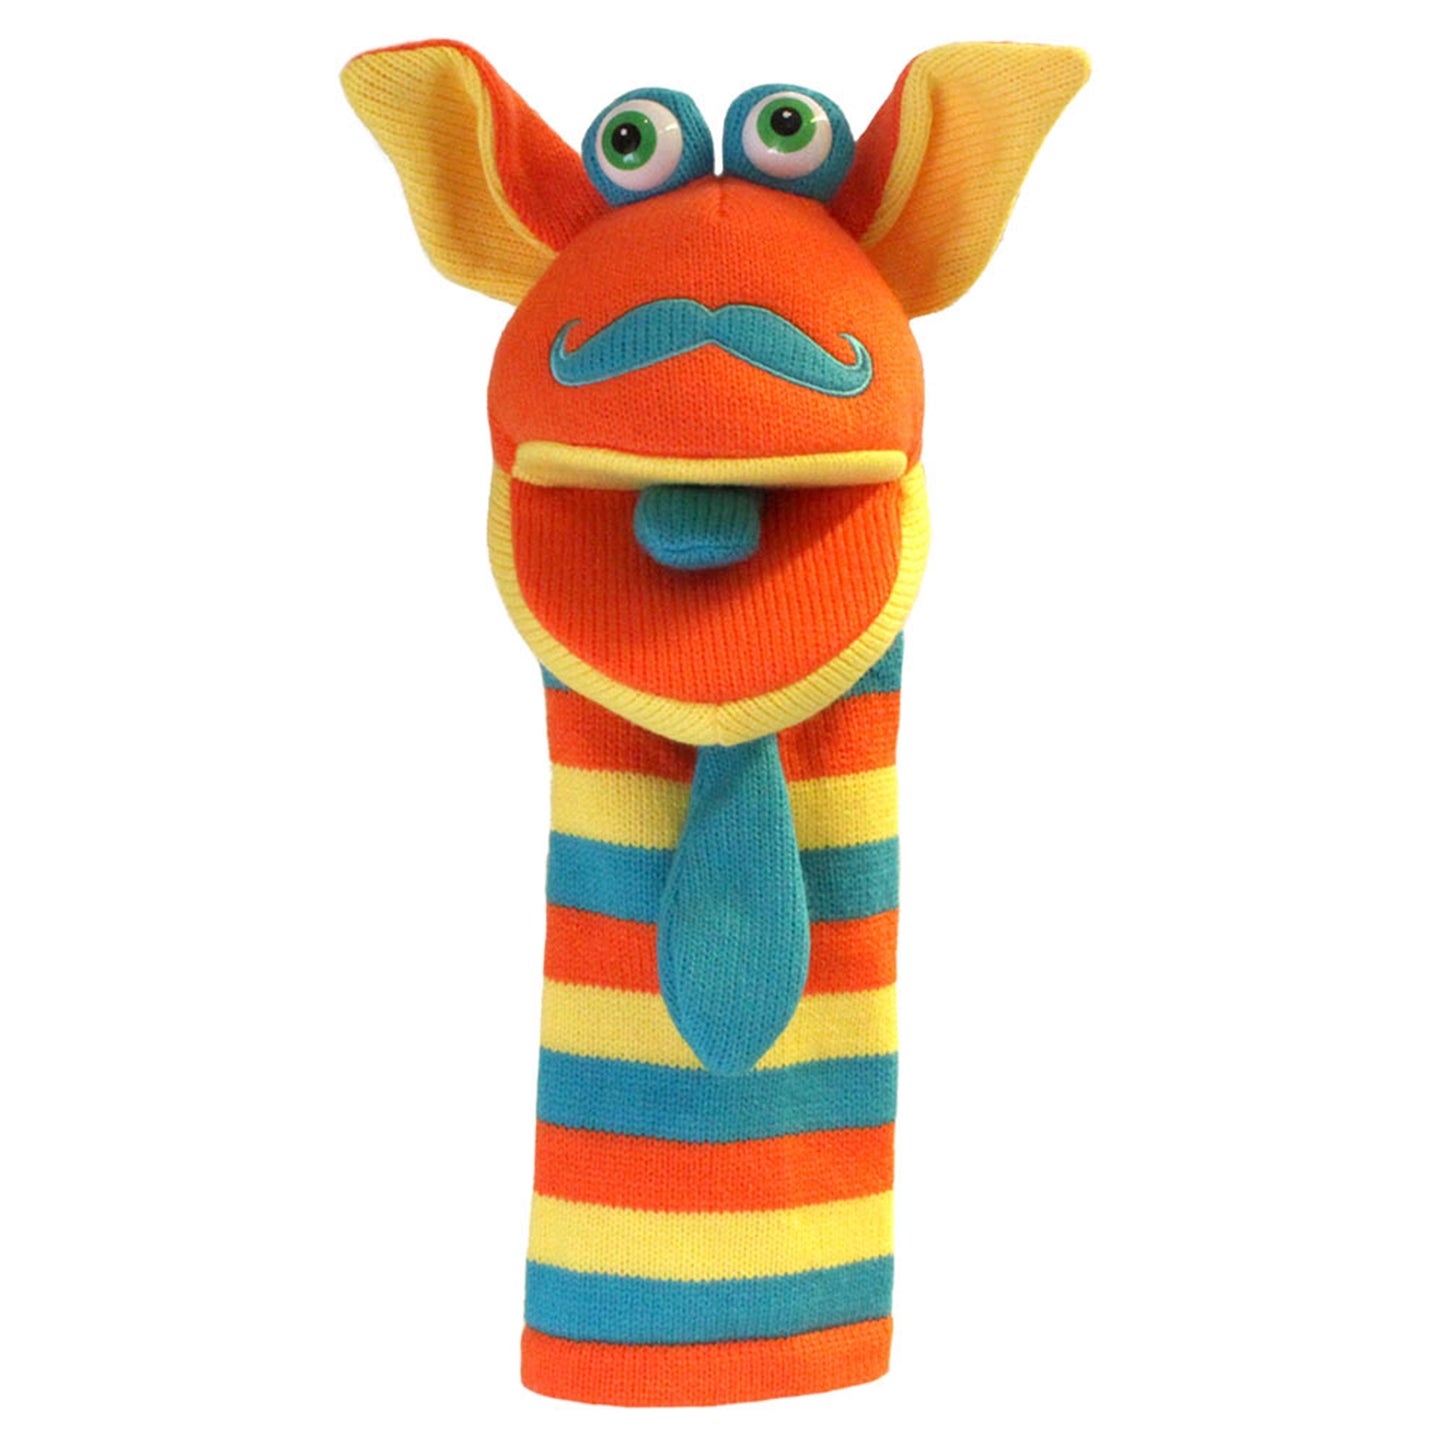 Sockette Hand Puppet - Mango - The Puppet Company - The Forgotten Toy Shop